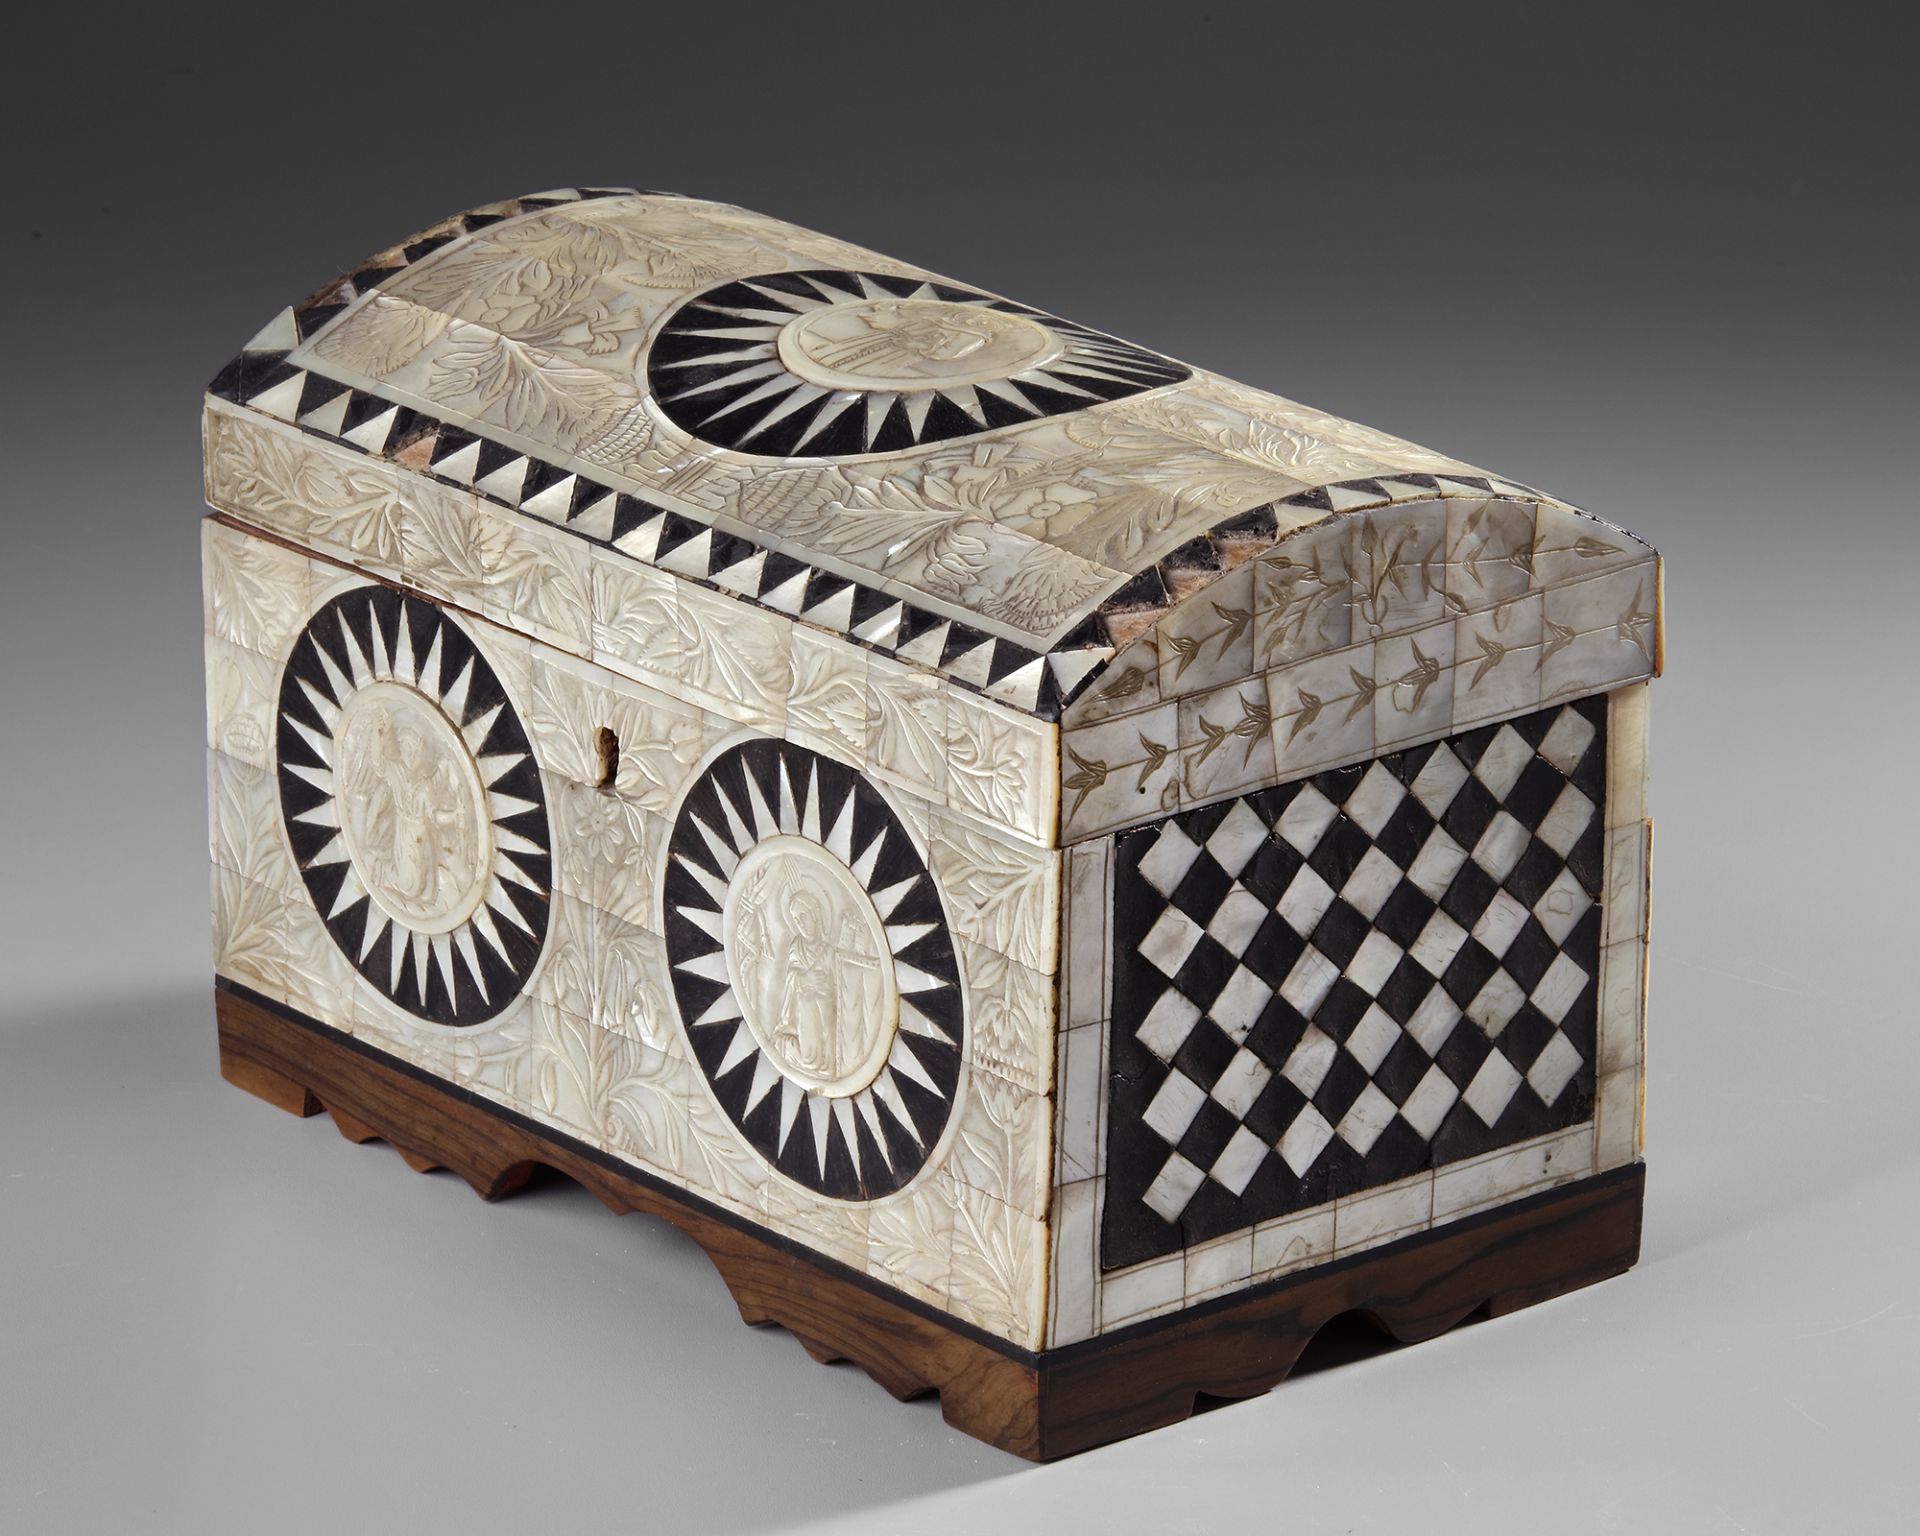 AN OTTOMAN MOTHER OF PEARL INLAID WOODEN BOX, TURKEY PROVINCES, 19TH CENTURY - Image 3 of 5